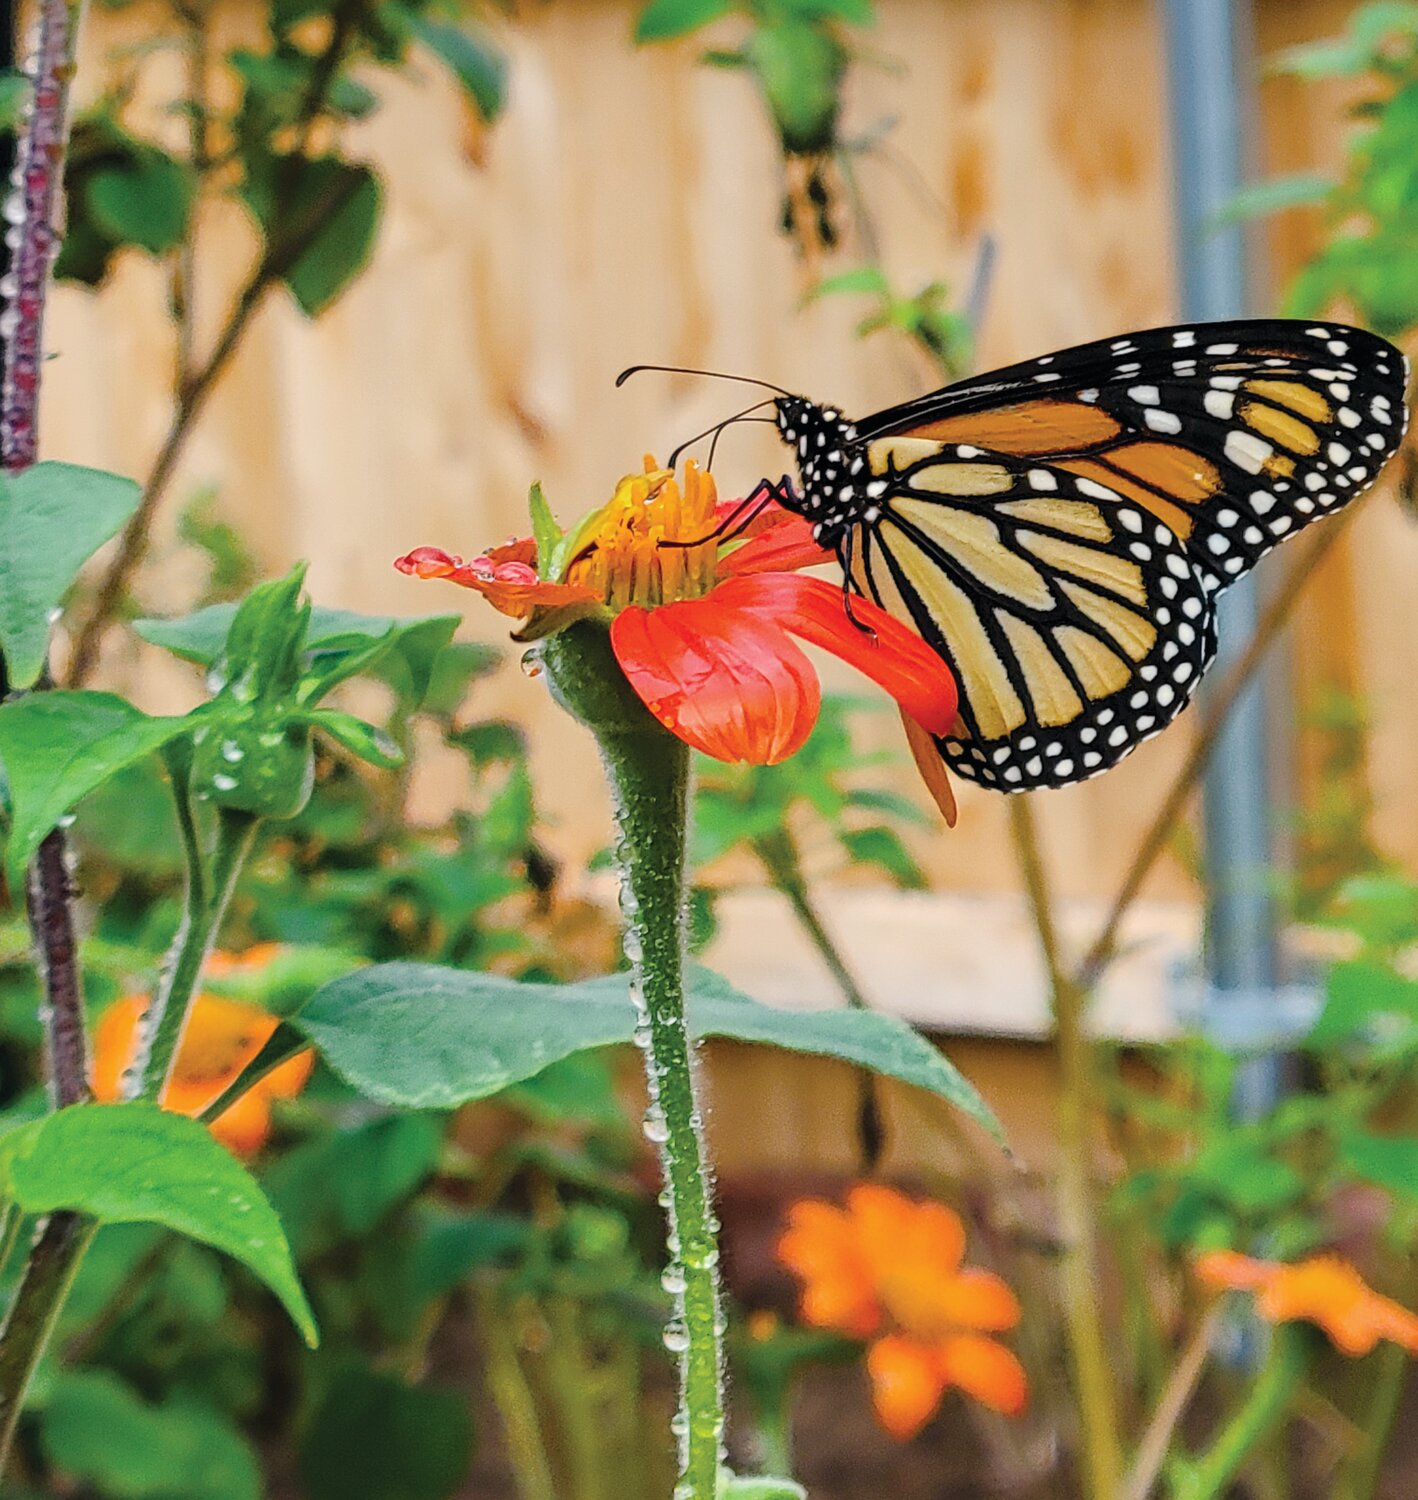 A MONARCH FEEDS: Since she started raising butterflies, Amy Ottilege has released more than 900 monarch butterflies.